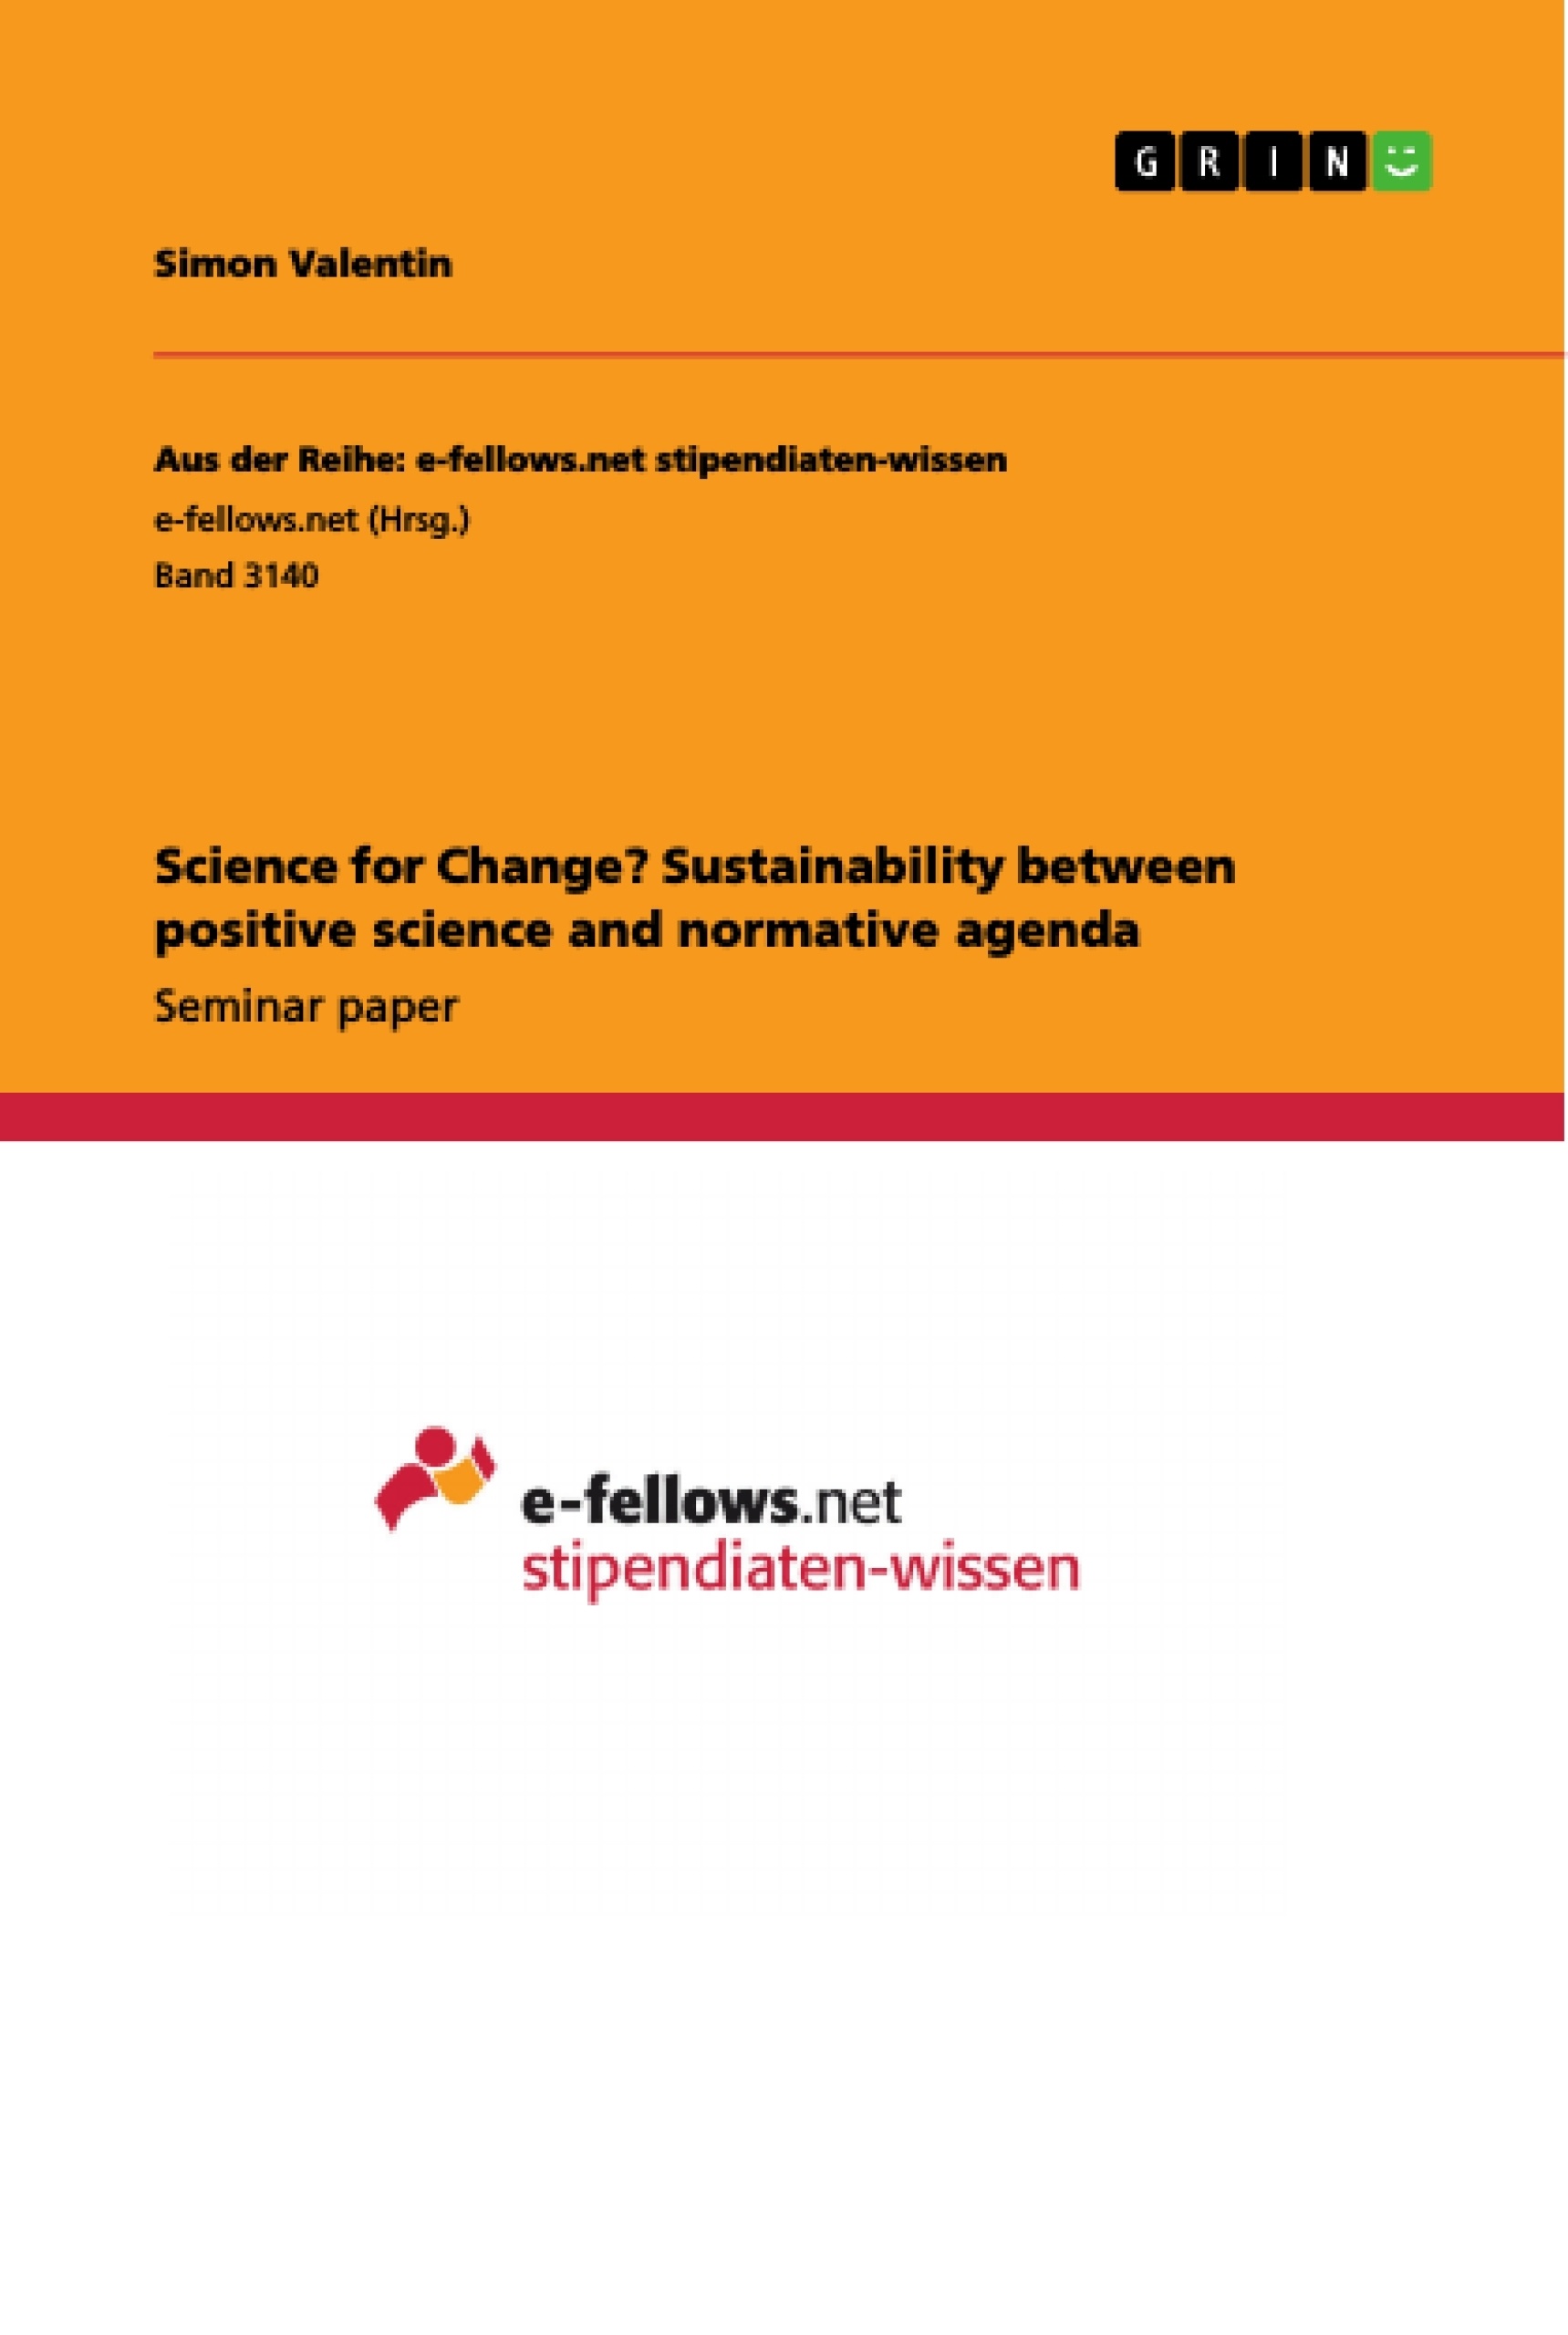 Título: Science for Change? Sustainability between positive science and normative agenda